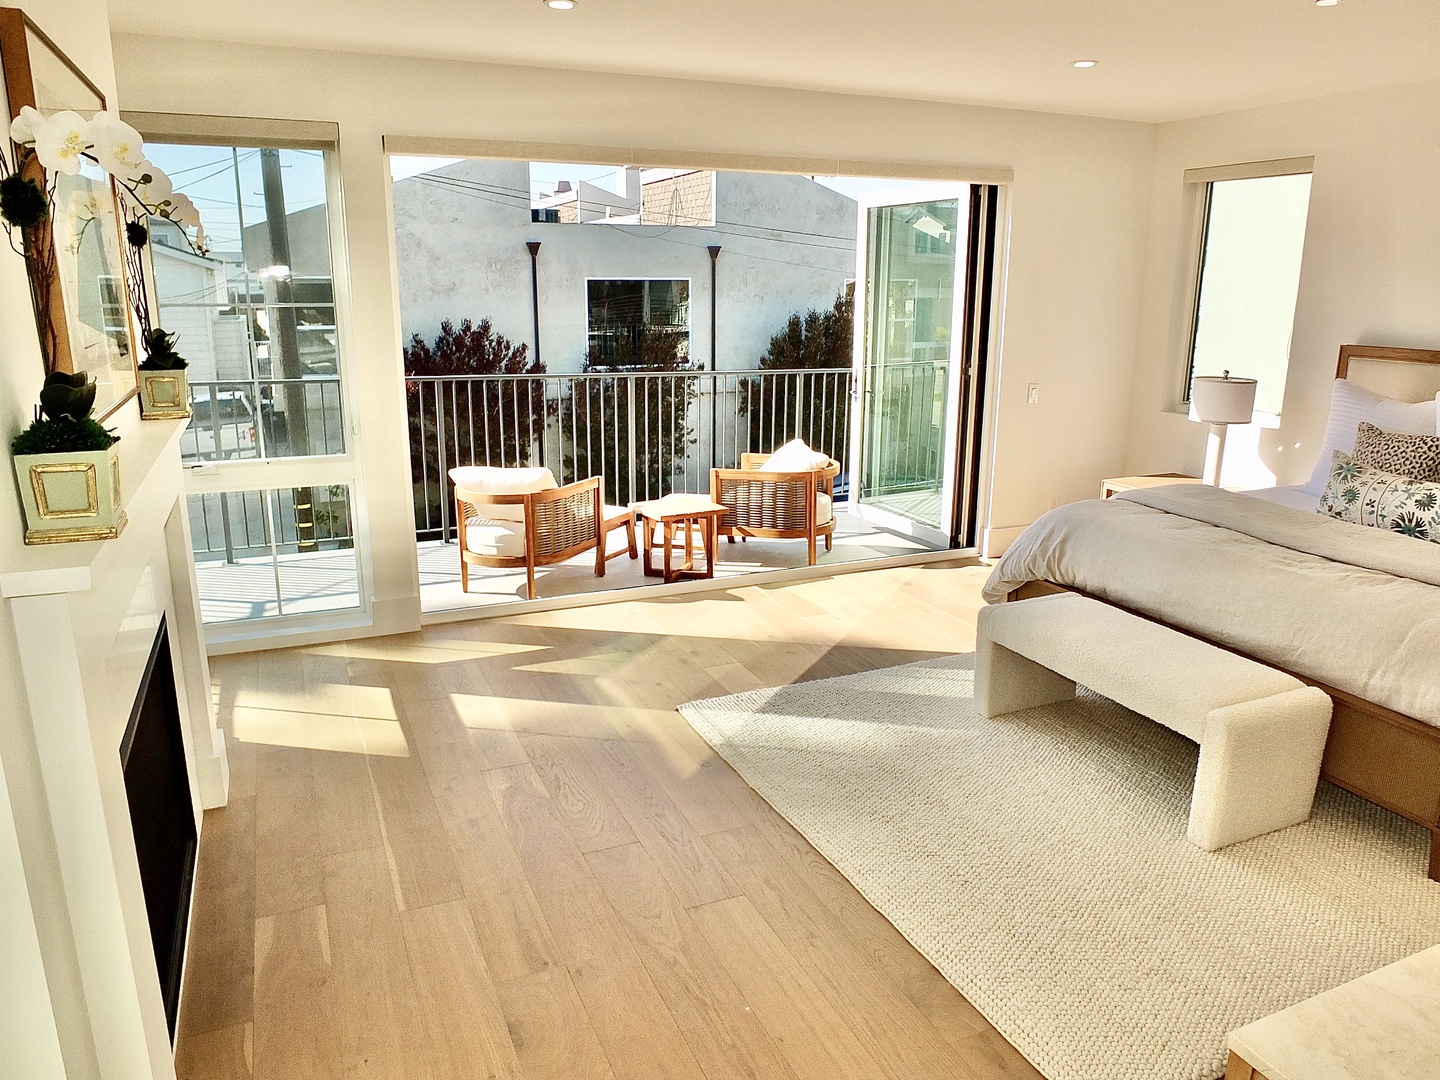 The 1st of 3 second-floor suites, boasting a king bed, ensuite, & balcony